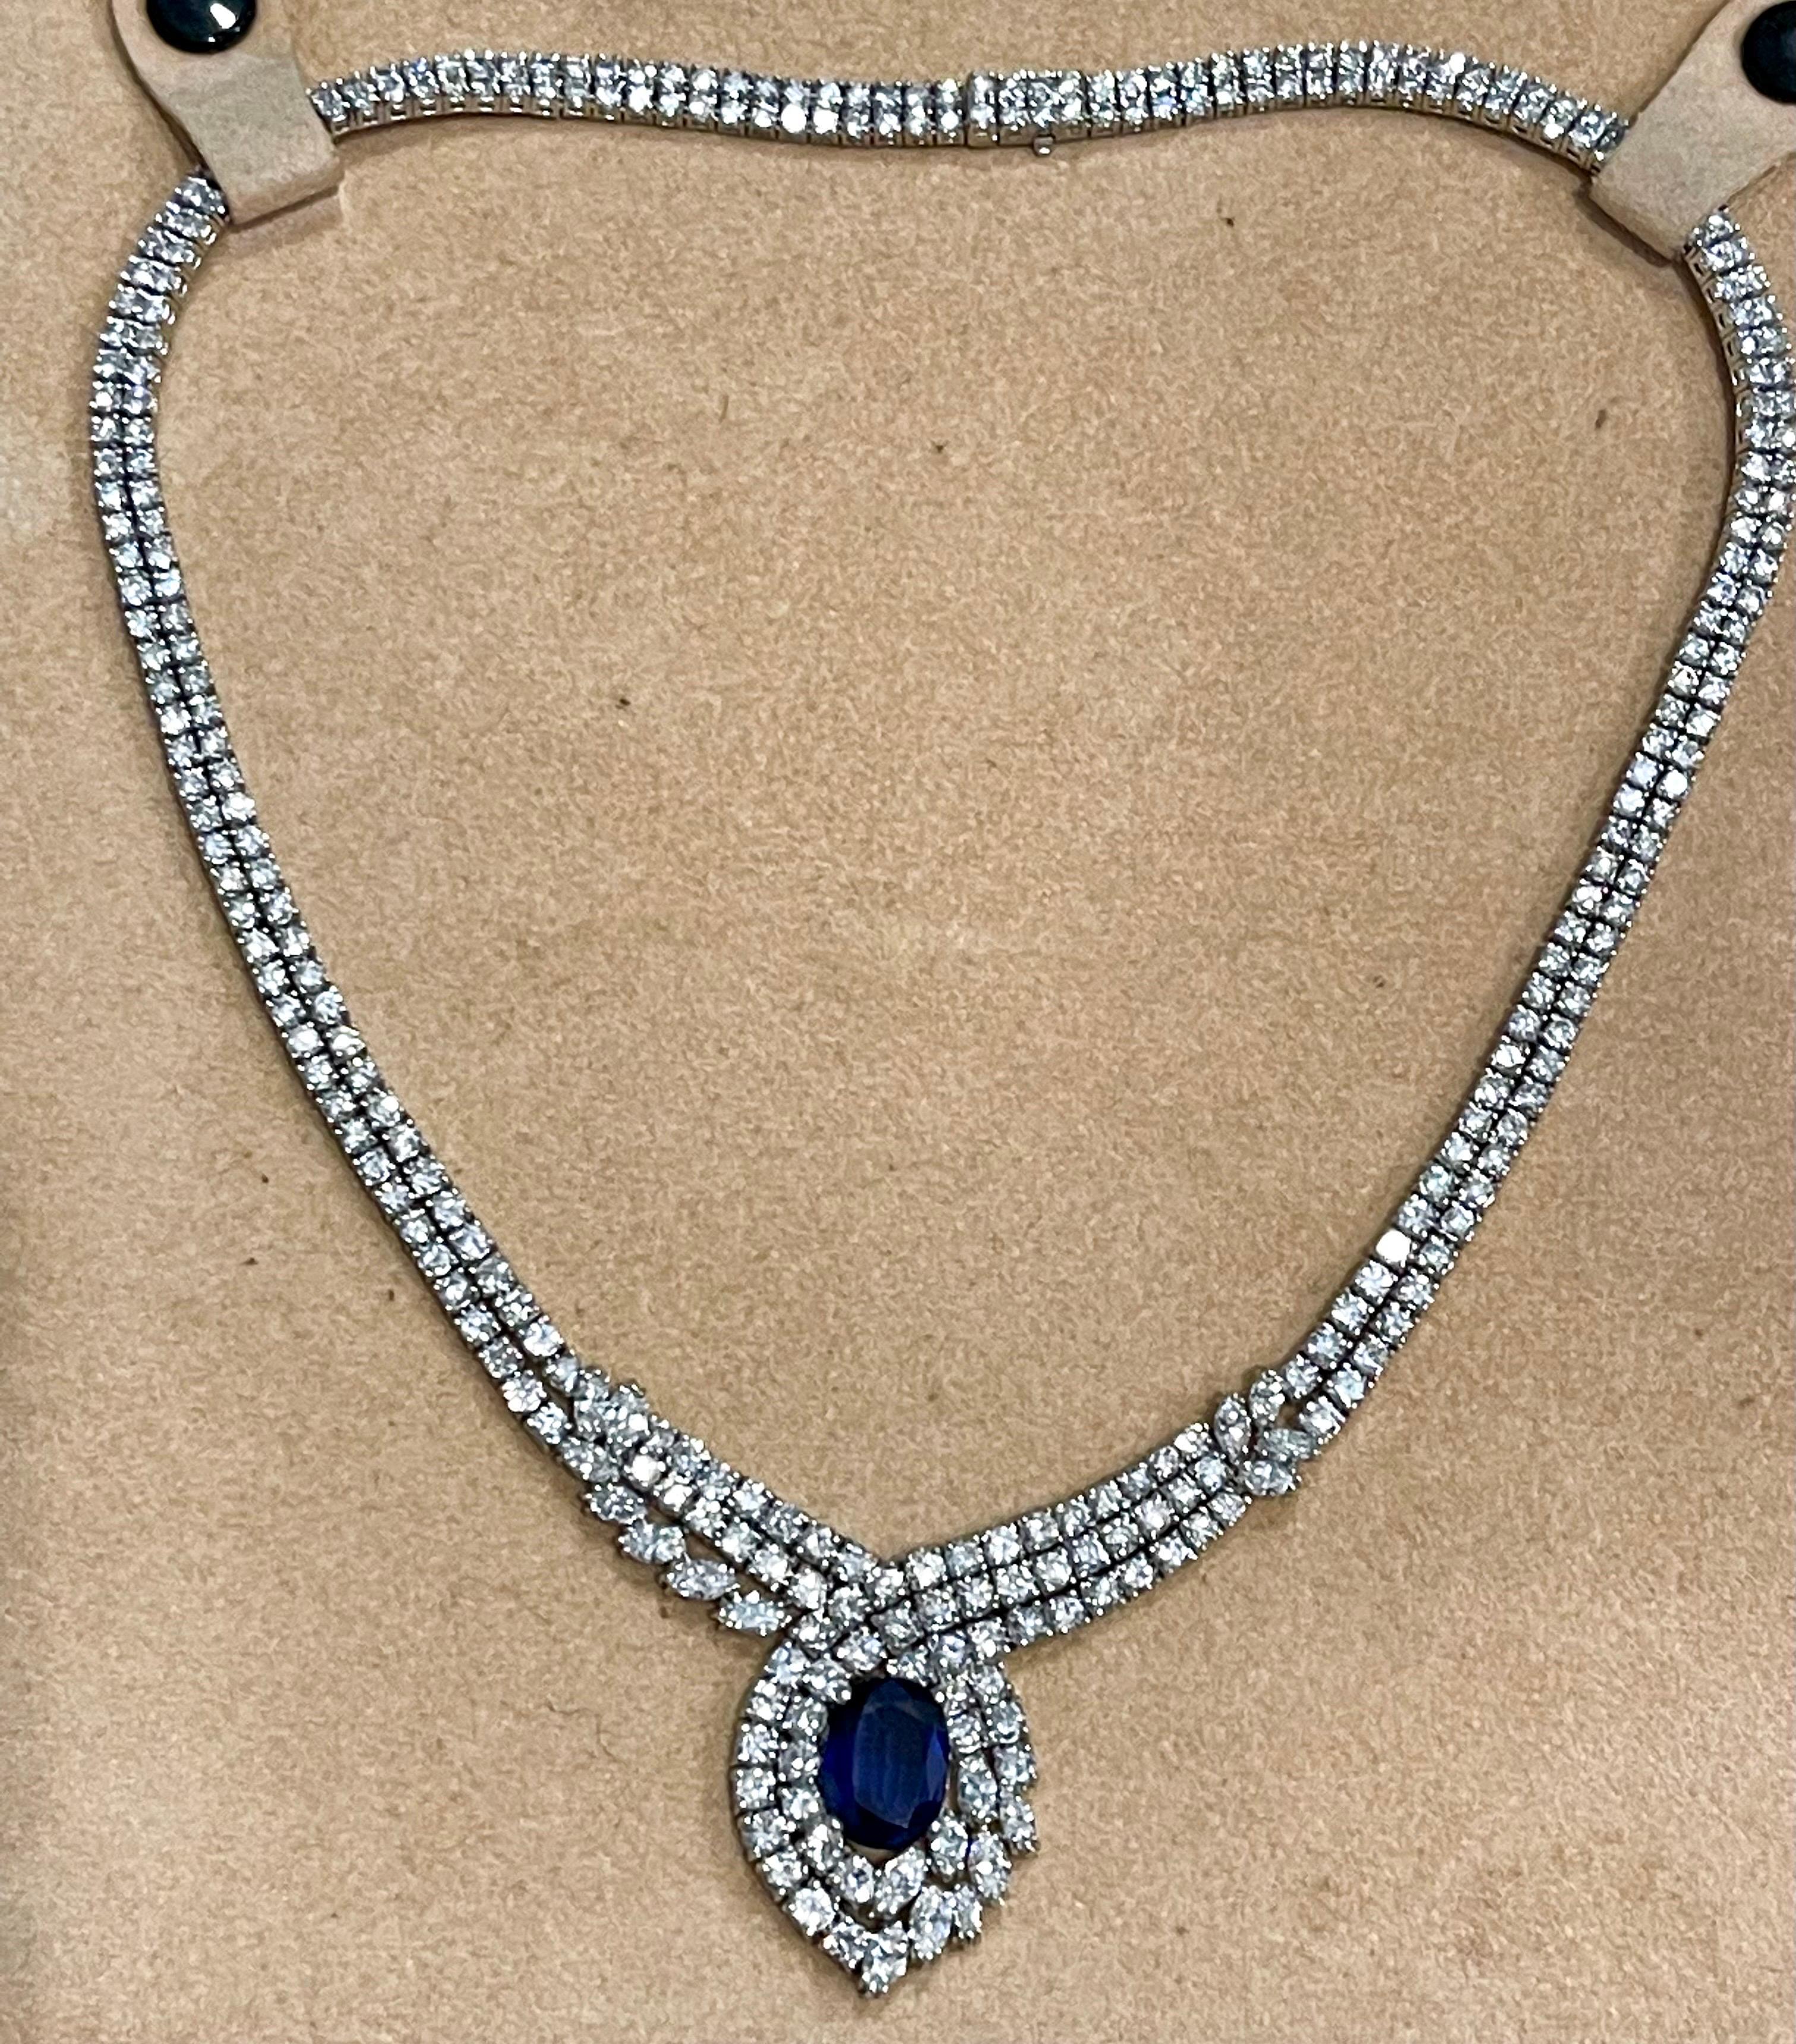 Oval Cut Vintage GIA Certified 6.5Ct Ceylon Sapphire & 32 Ct Diamond Necklace 18K W Gold For Sale